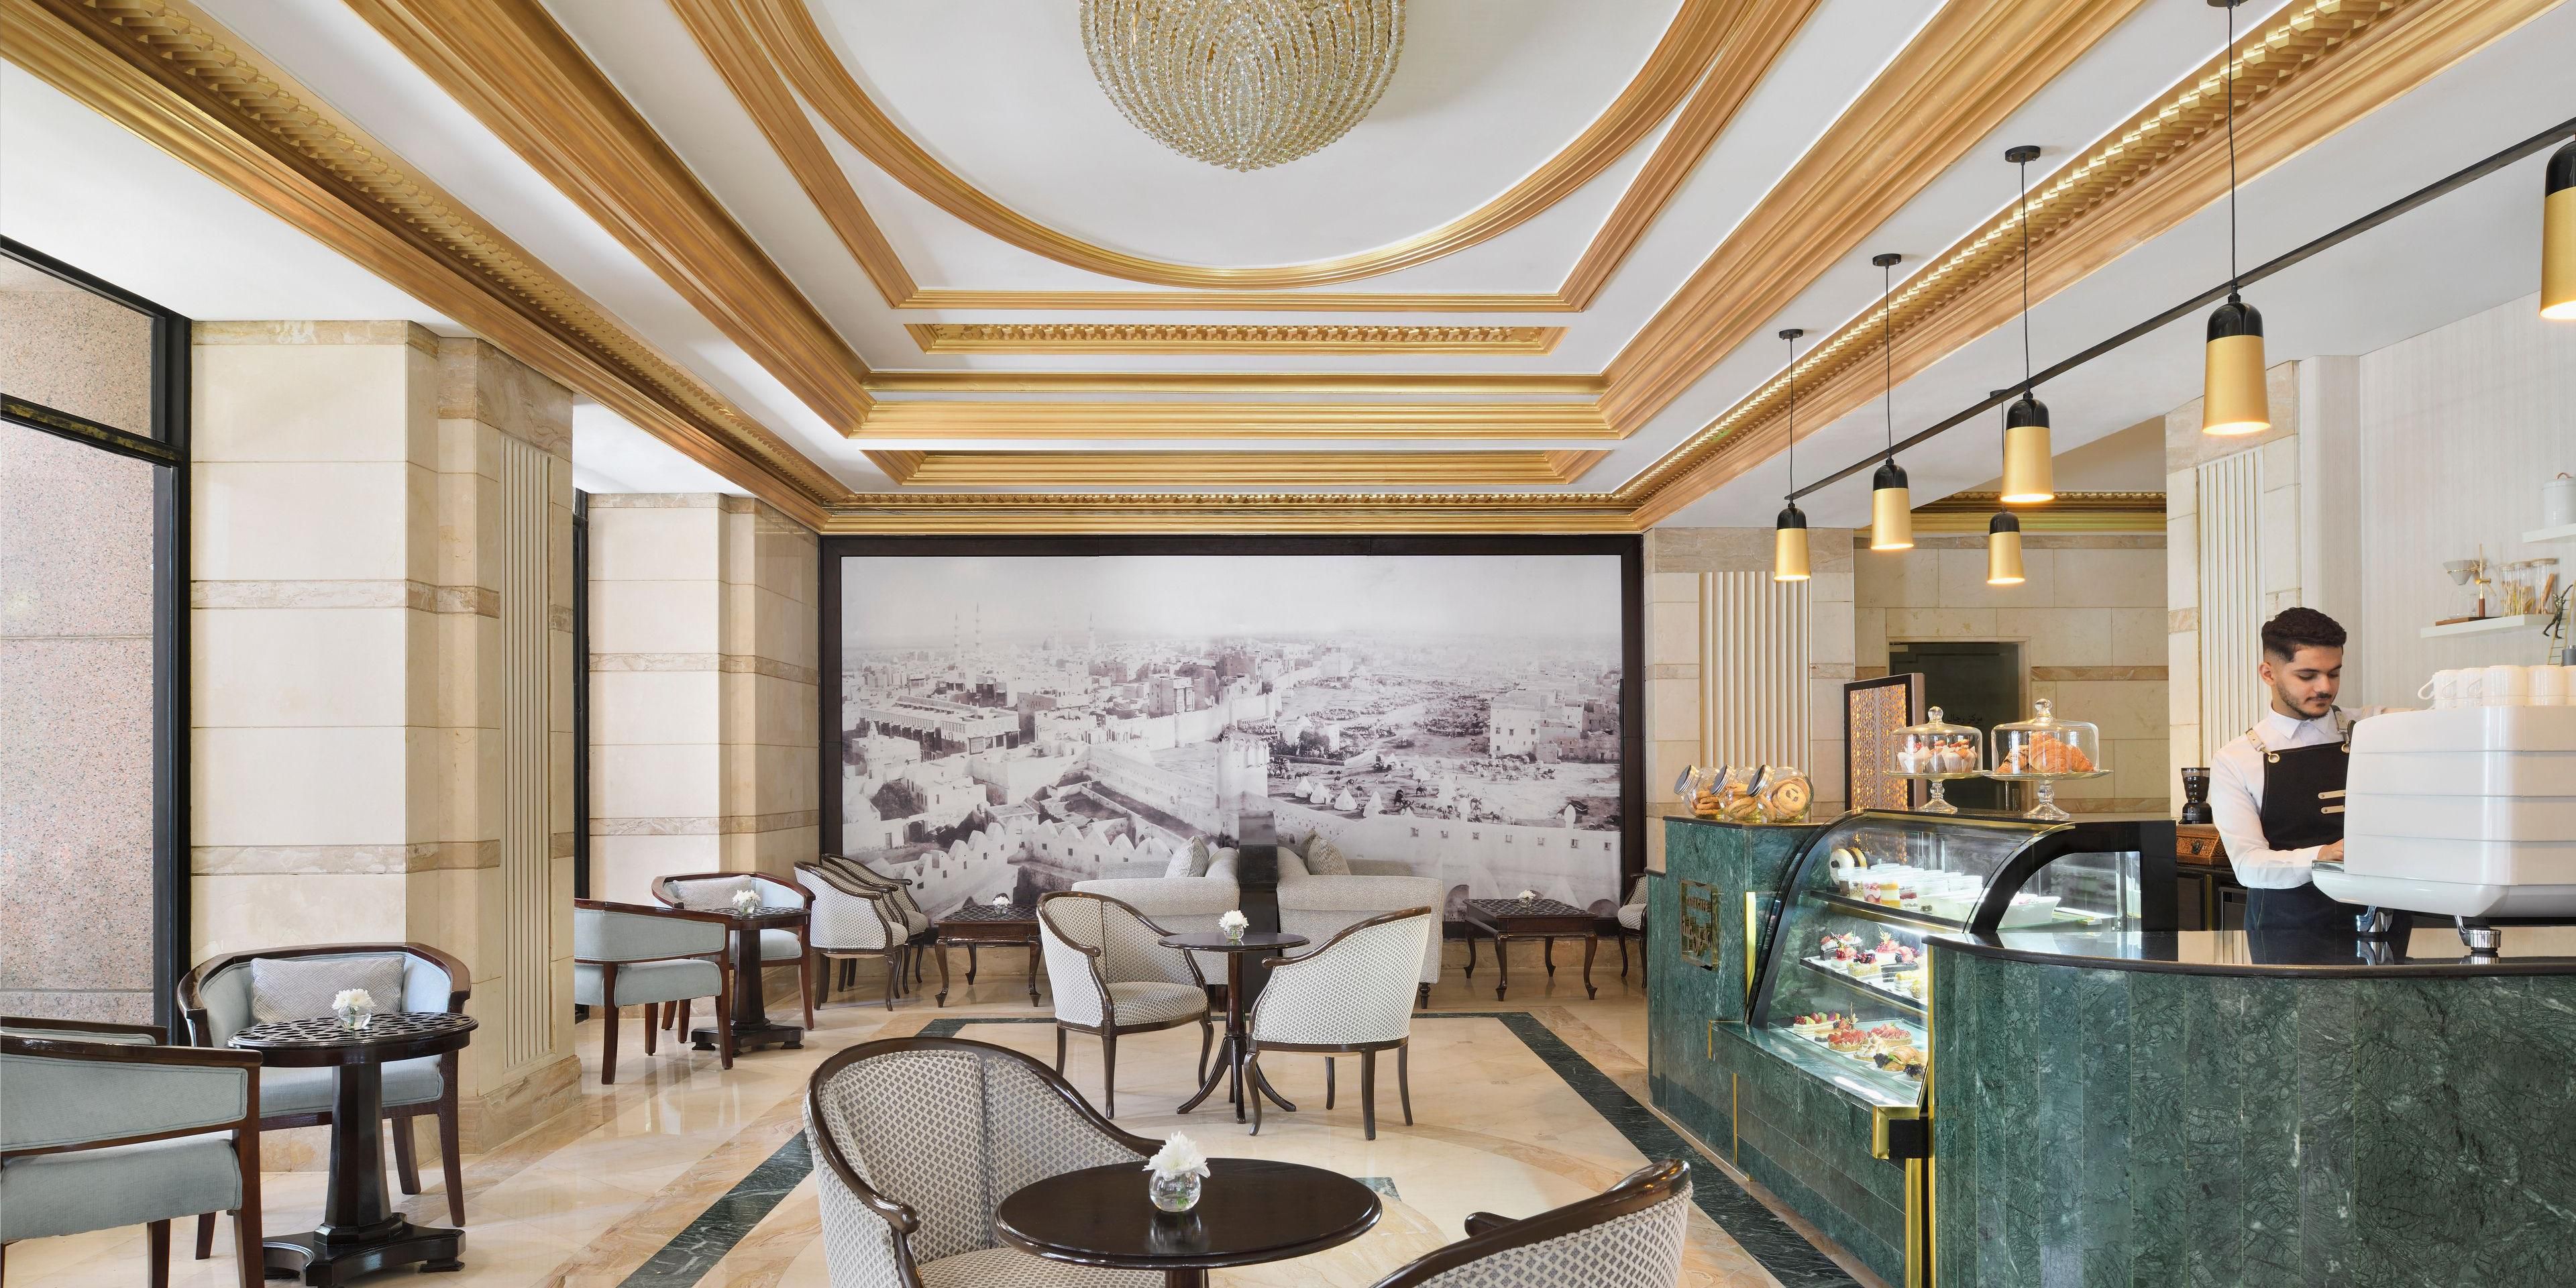 Enjoy a quintessential afternoon coffee or tea in Taiba Cafe near Haram and delight in freshly ground aromatic coffee or a perfect cup of precisely decanted tea blends.